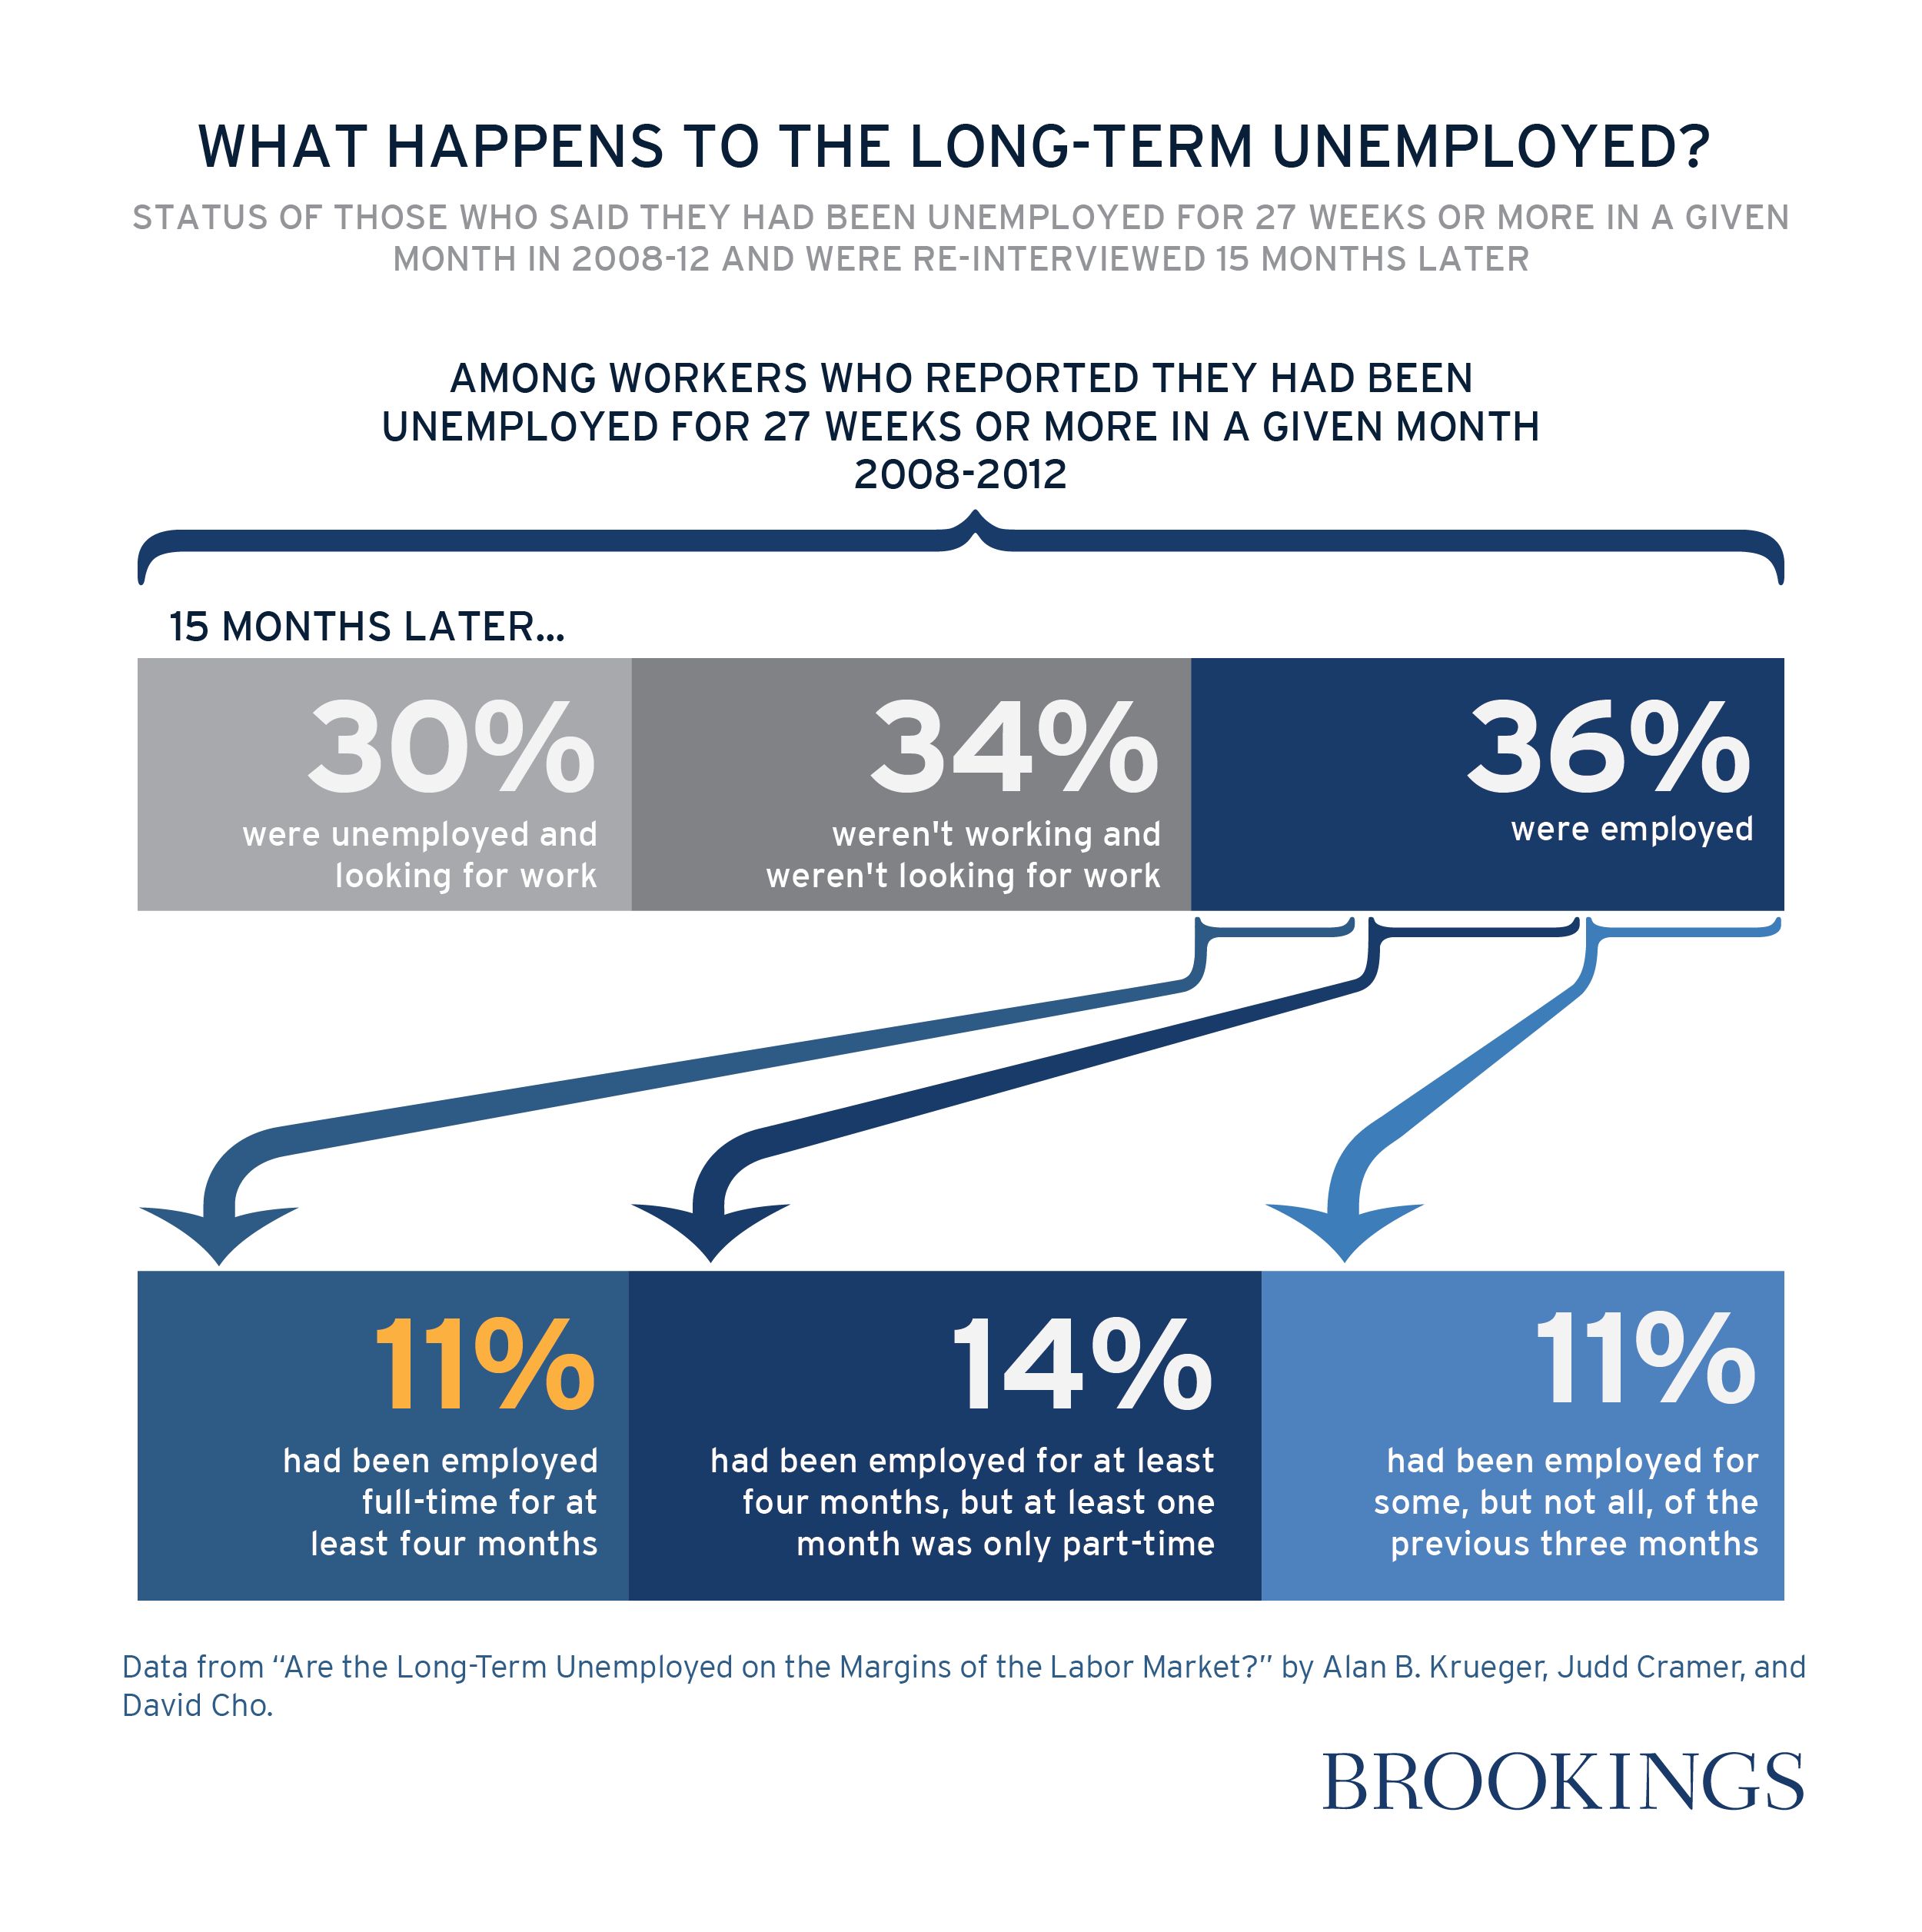 Are the Long-Term Unemployed on the Margins of the Labor Market?